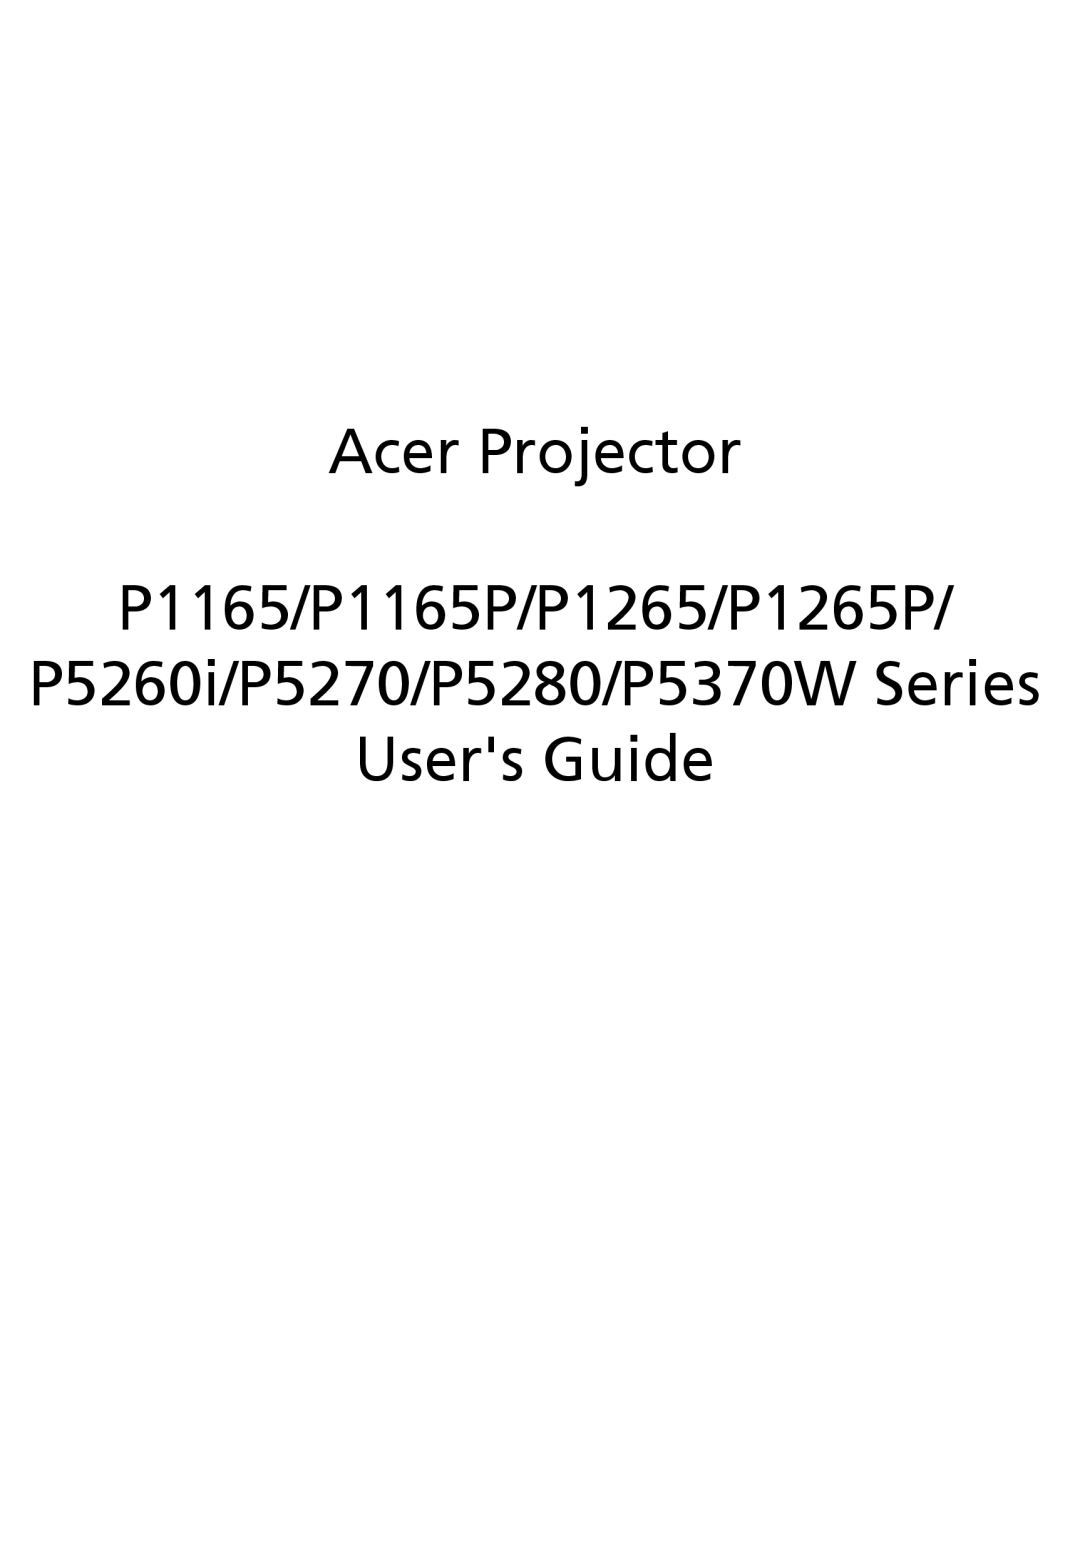 Acer manual Acer Projector P1165/P1165P/P1265/P1265P, P5260i/P5270/P5280/P5370W Series Users Guide 